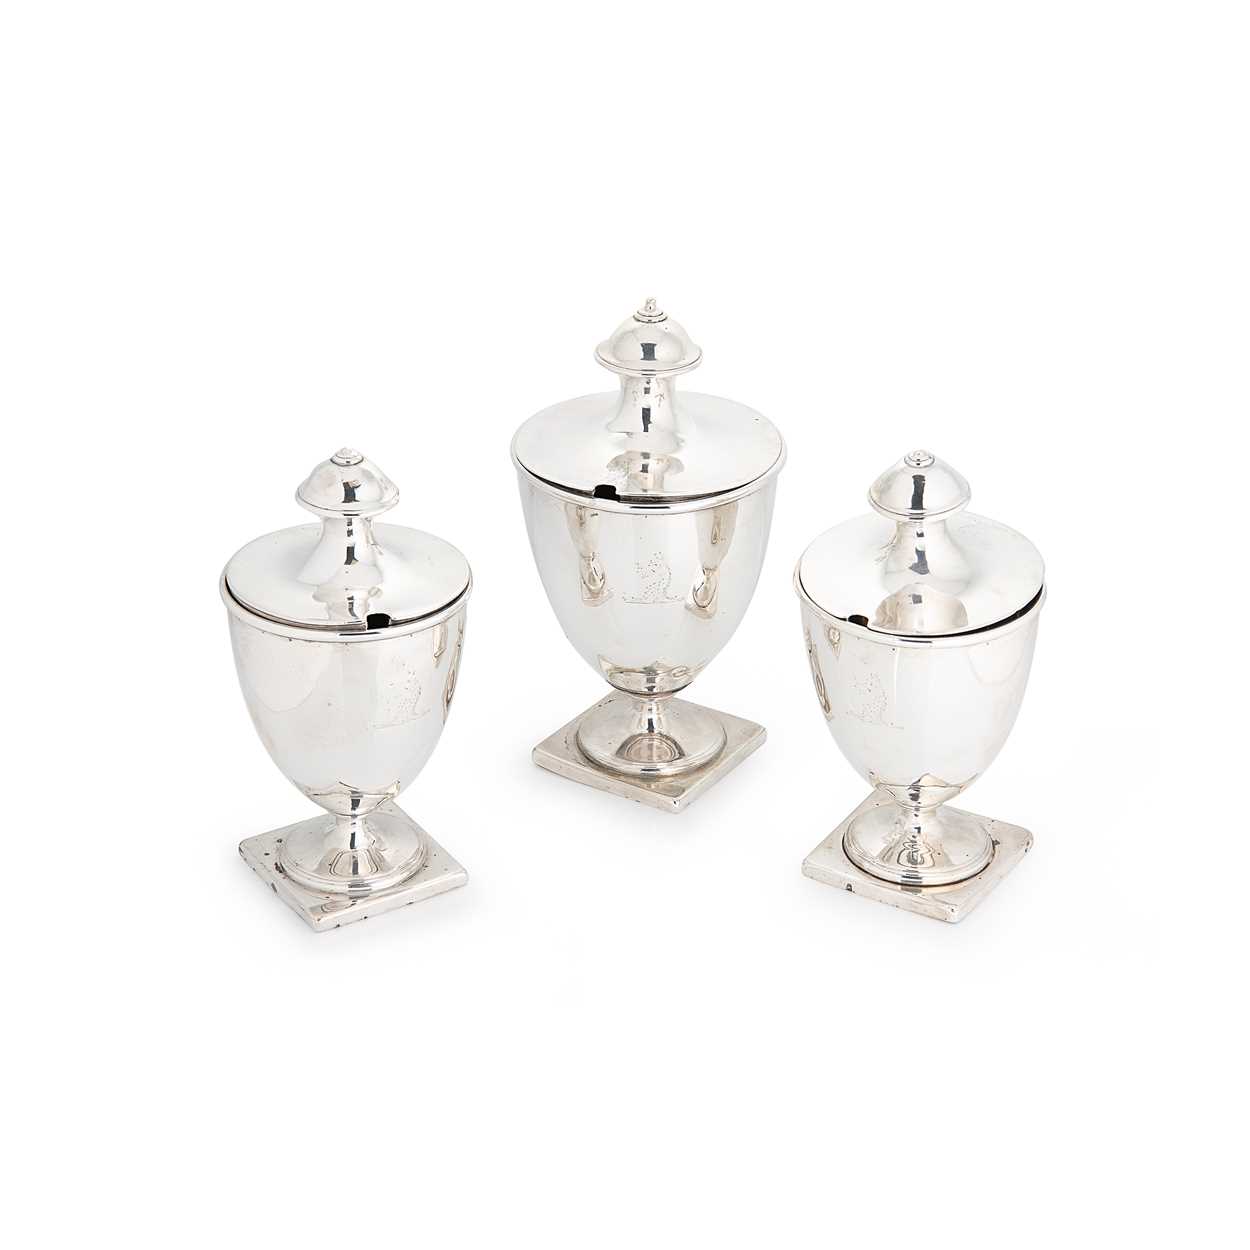 A set of 3 George III 18th century silver sugar vases with covers,